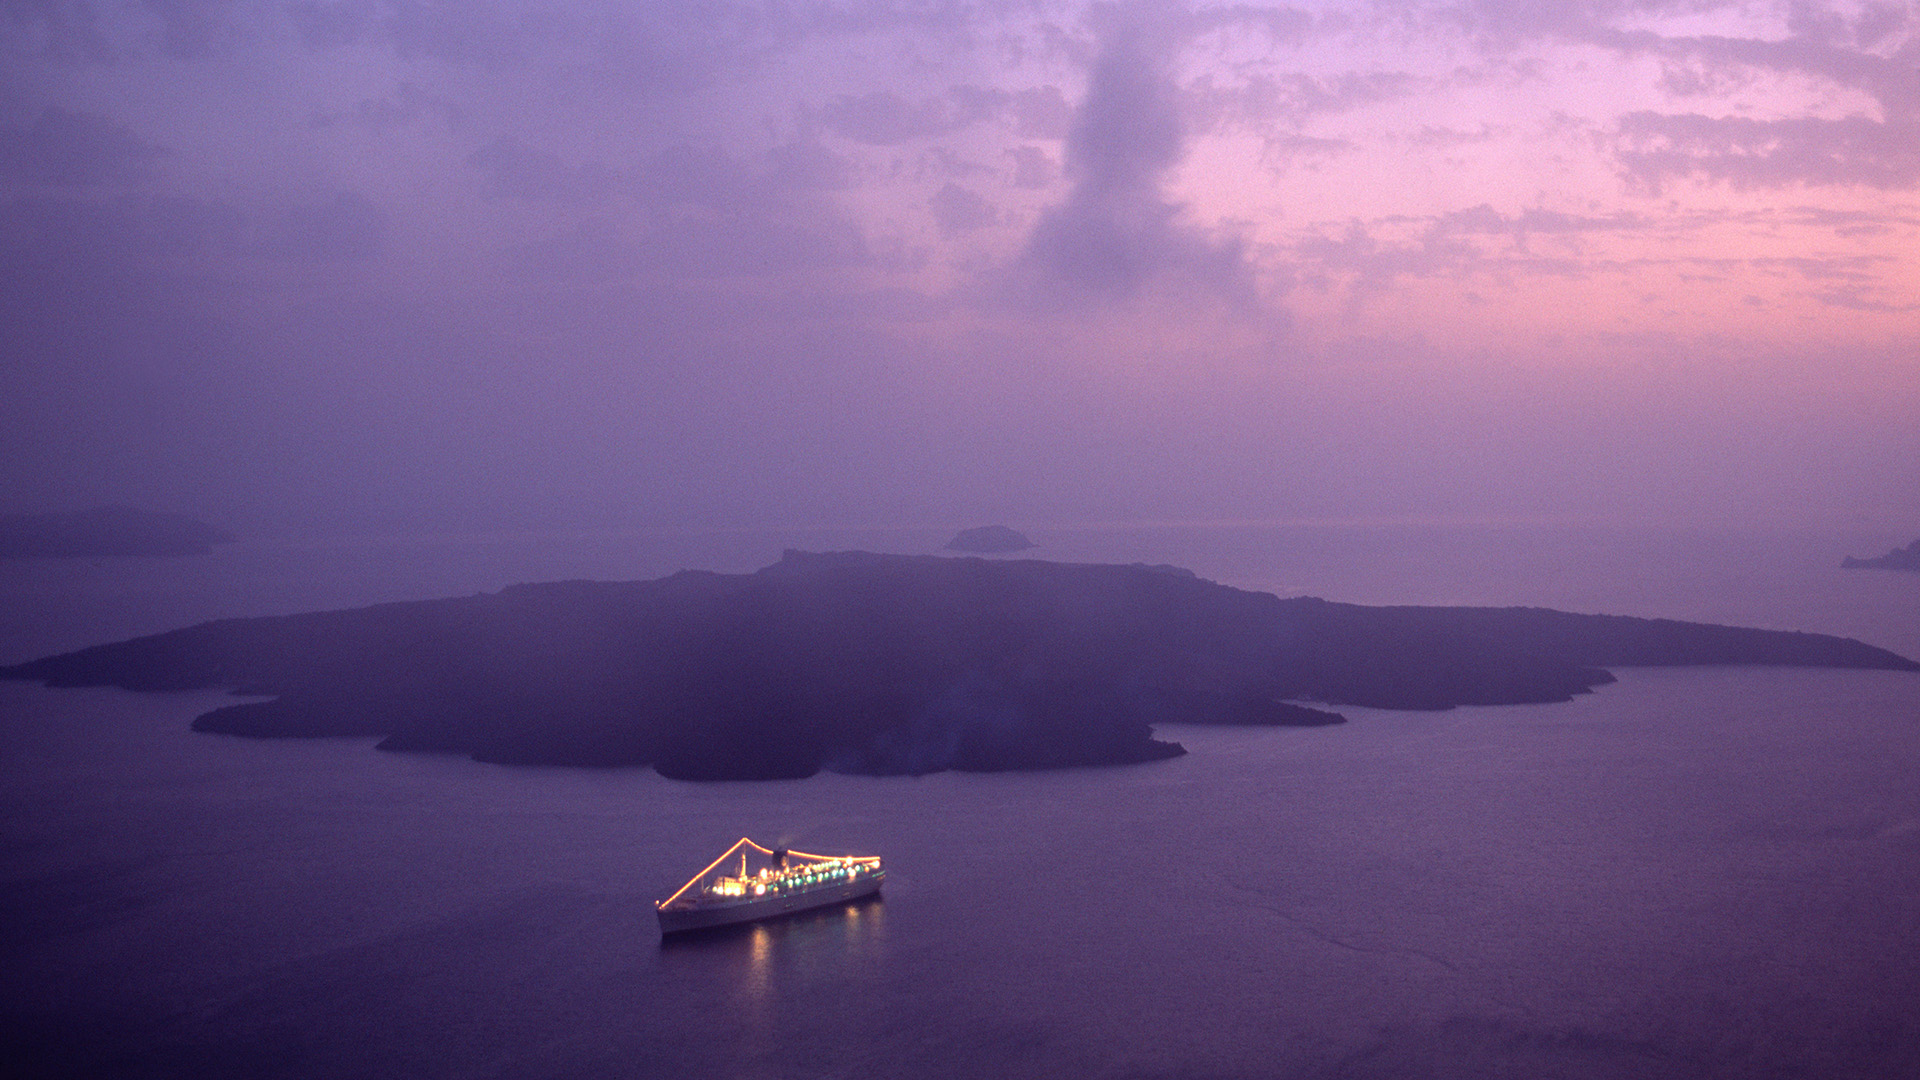 An aerial view of a cruise ship with lights on deck and on the rigging, on the sea in front of a remote island.